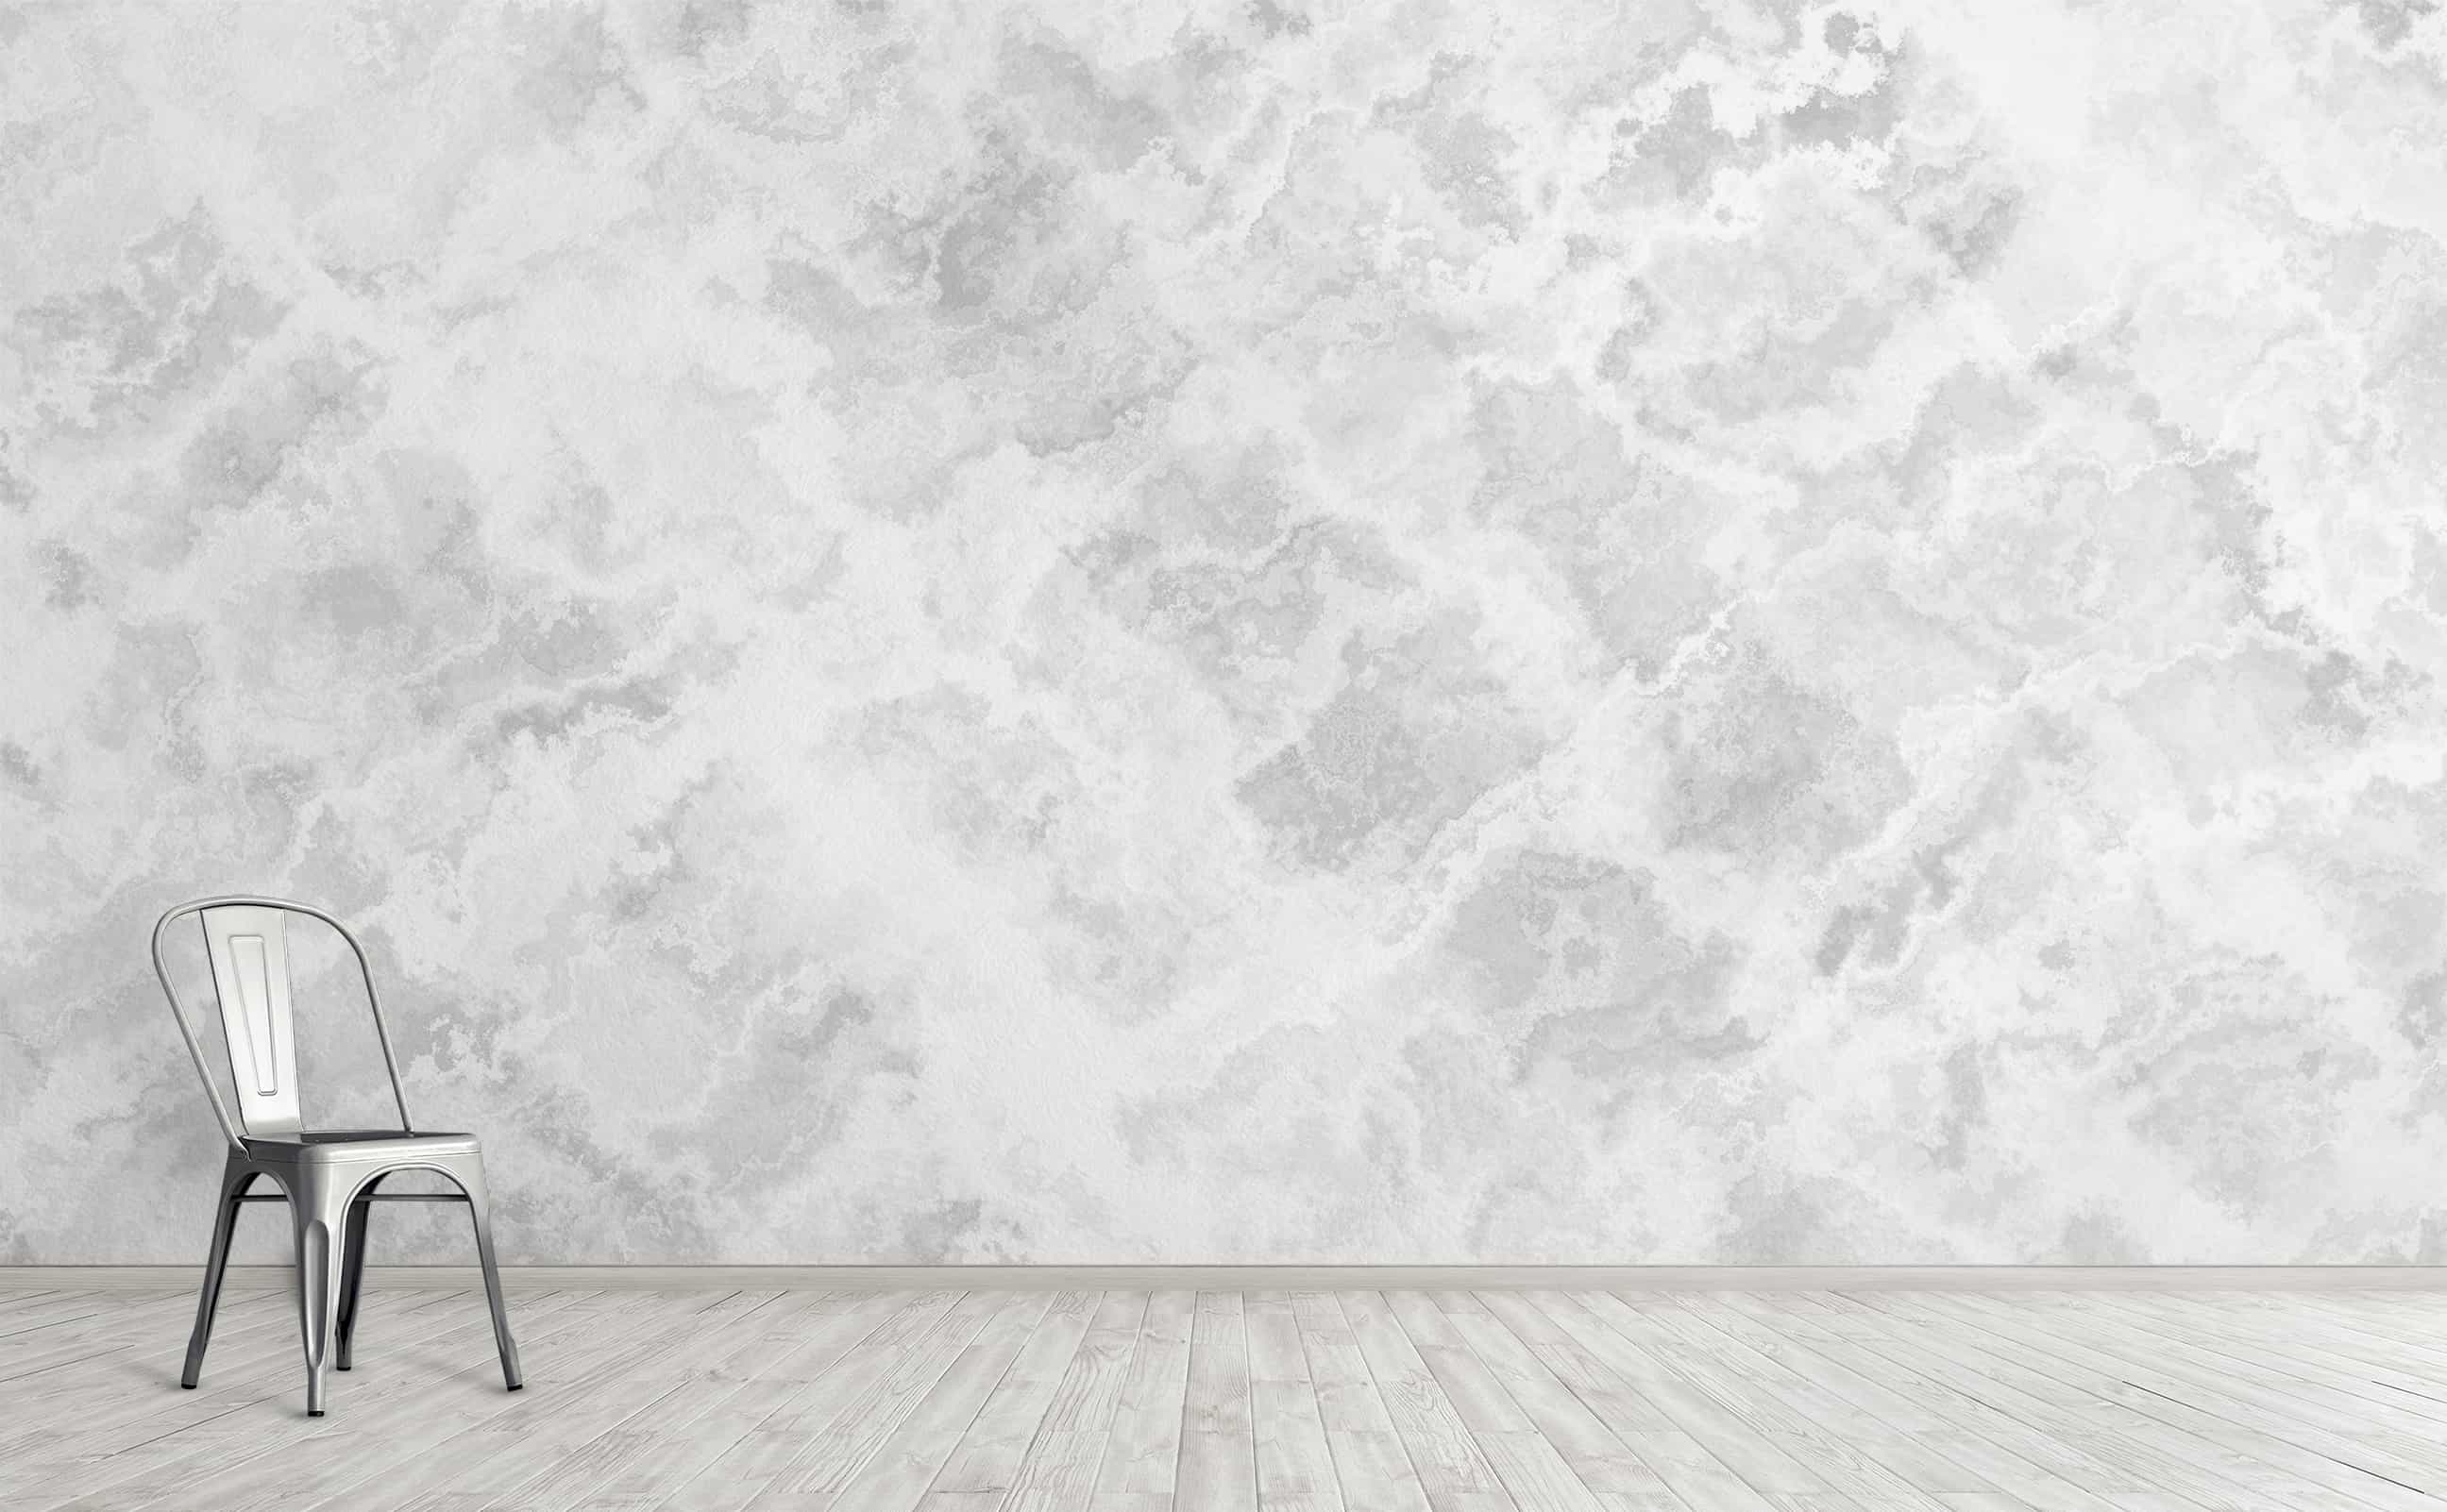 Bachcha Peda Dillivry Xxx Video - Soft white grunge stone marble Wall Mural | Distortion Pedal